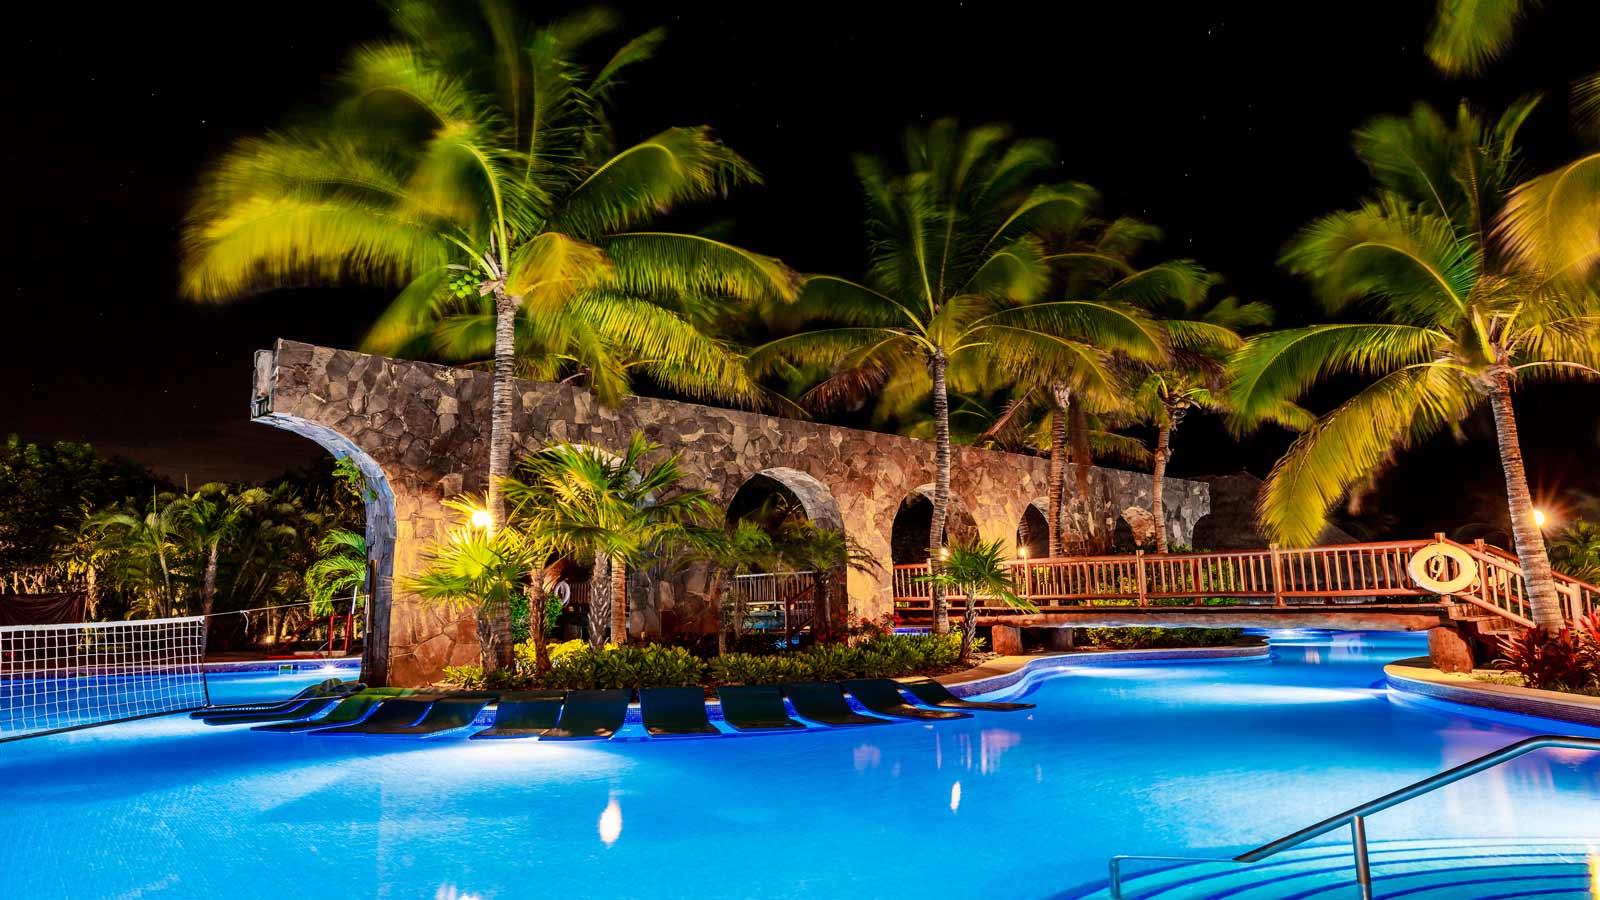 <p><strong>Address:</strong> Carretera Federal 307 Puerto Juarez KM 311, 77710 Playa del Carmen, Q.R., Mexico</p><p>The Valentin Imperial is an award-winning resort with a Mexican hacienda design, tropical gardens, a stunning swimming pool, and access to a secluded beach. It’s a 5-star, adults-only hotel with 24-hour room service, nightly entertainment, and daily activities. </p>